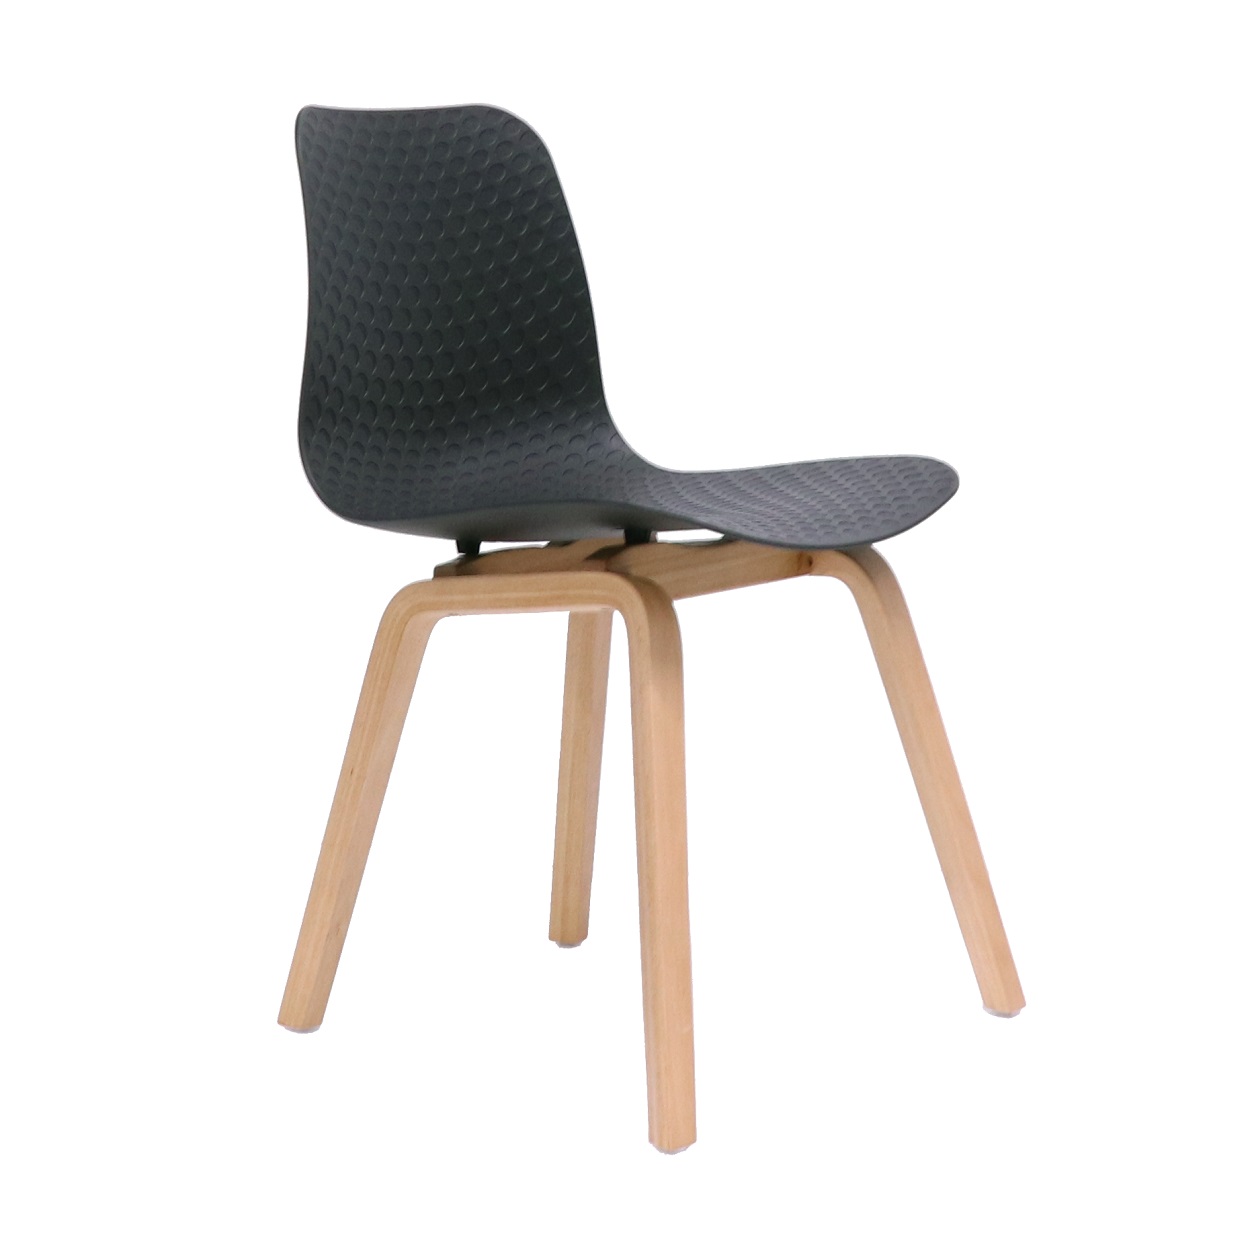 Lucid Chair black on timber